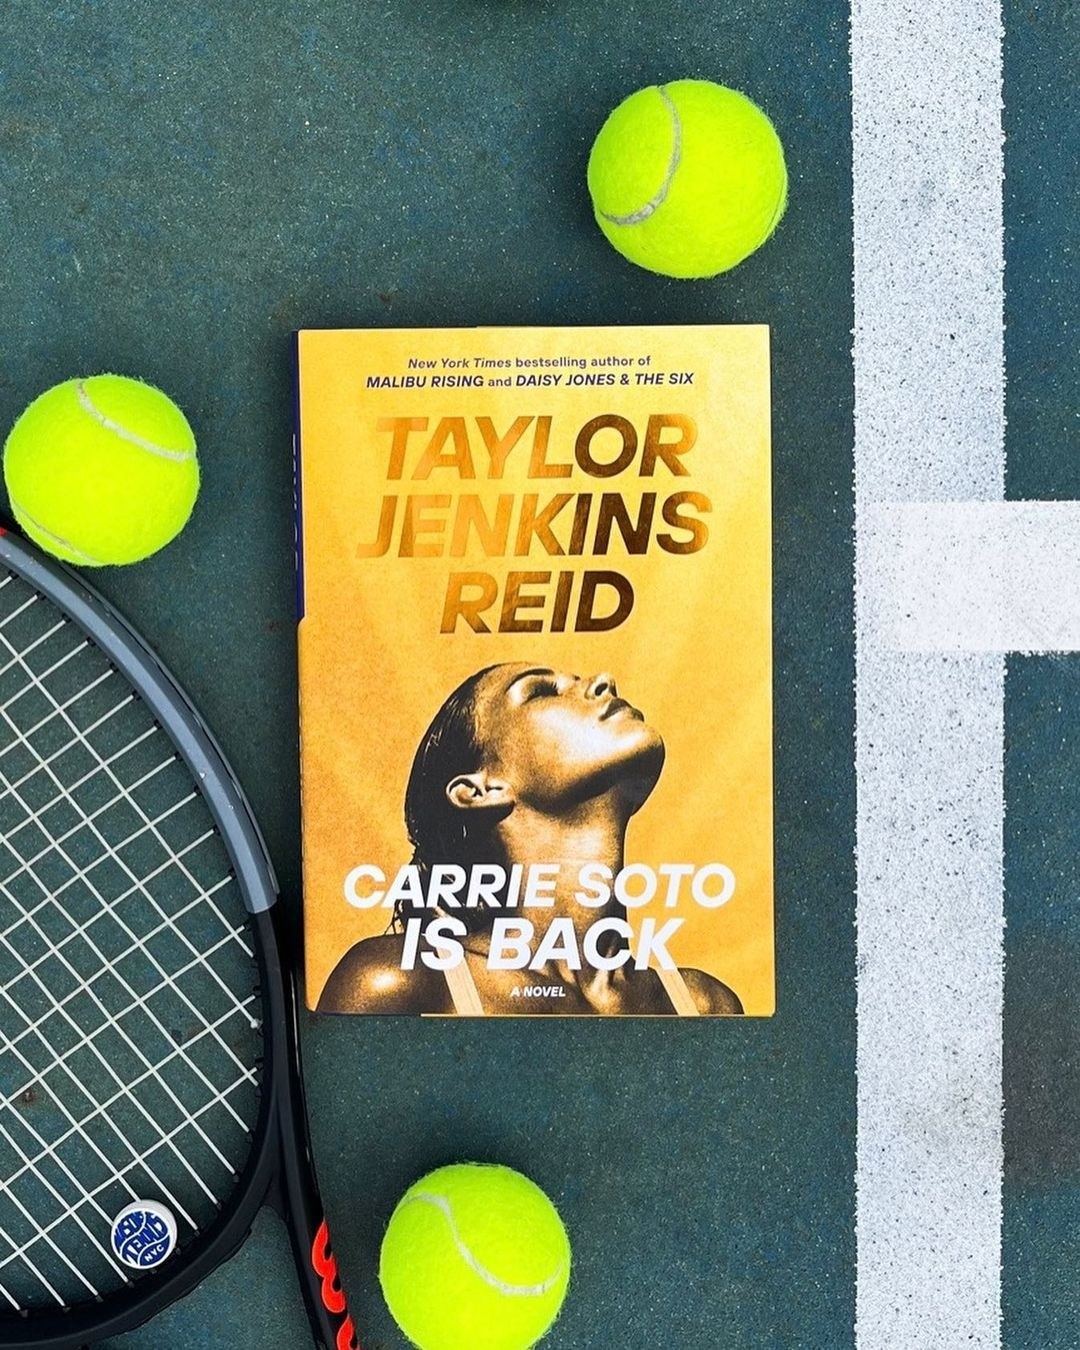 The book on a tennis court surrounded by rackets and balls